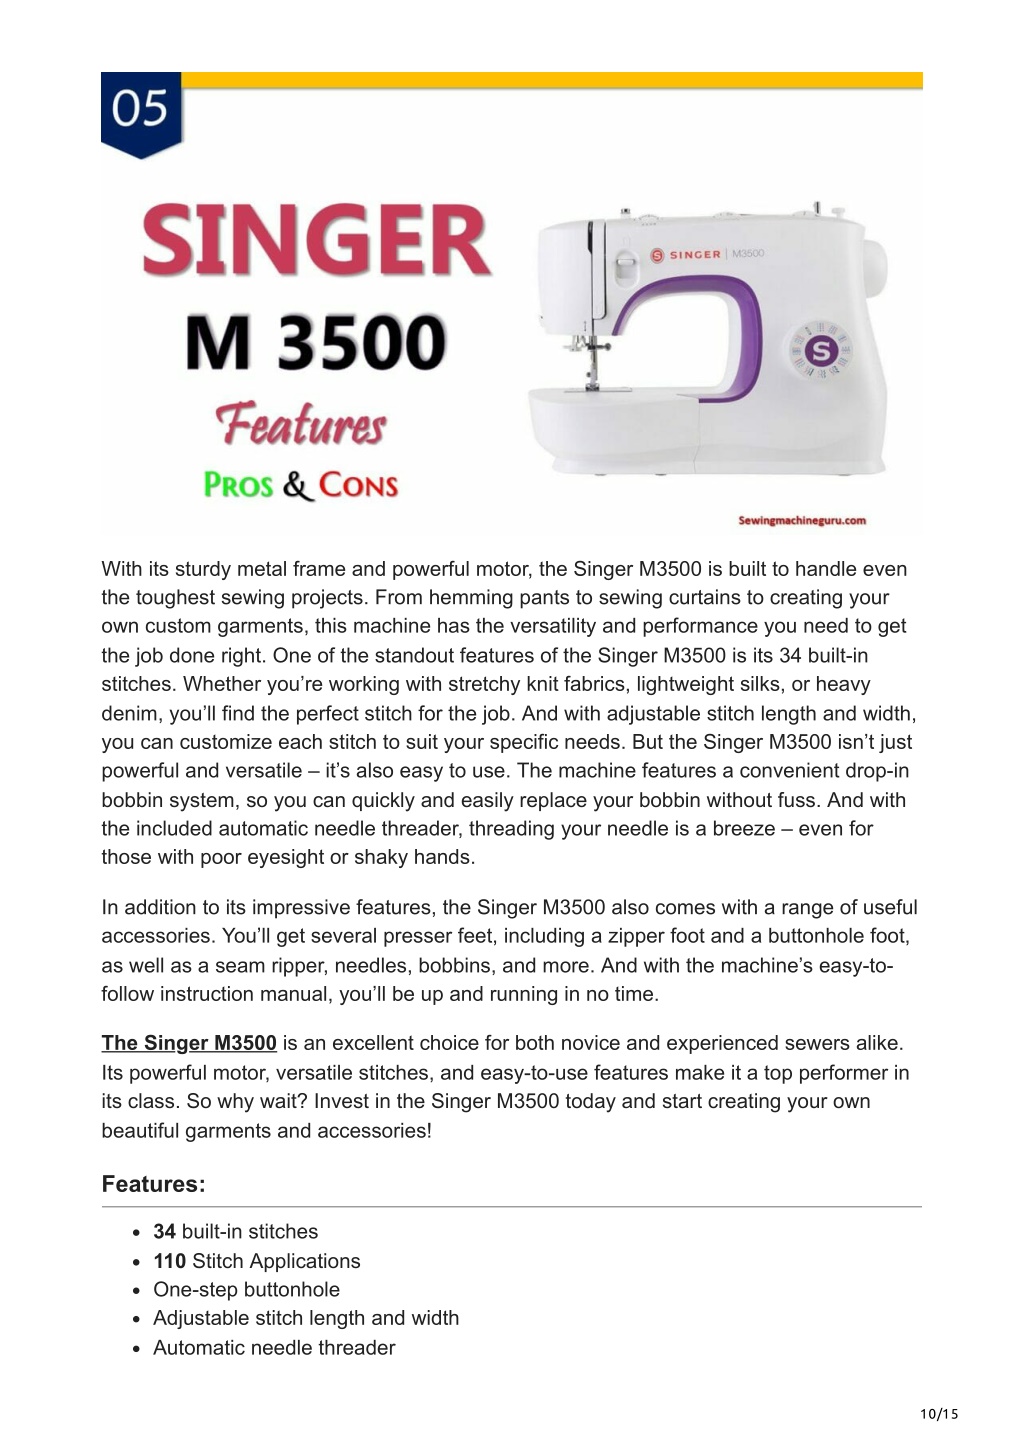 Singer M3500 Portable Sewing Machine With 110 Stitch Applications